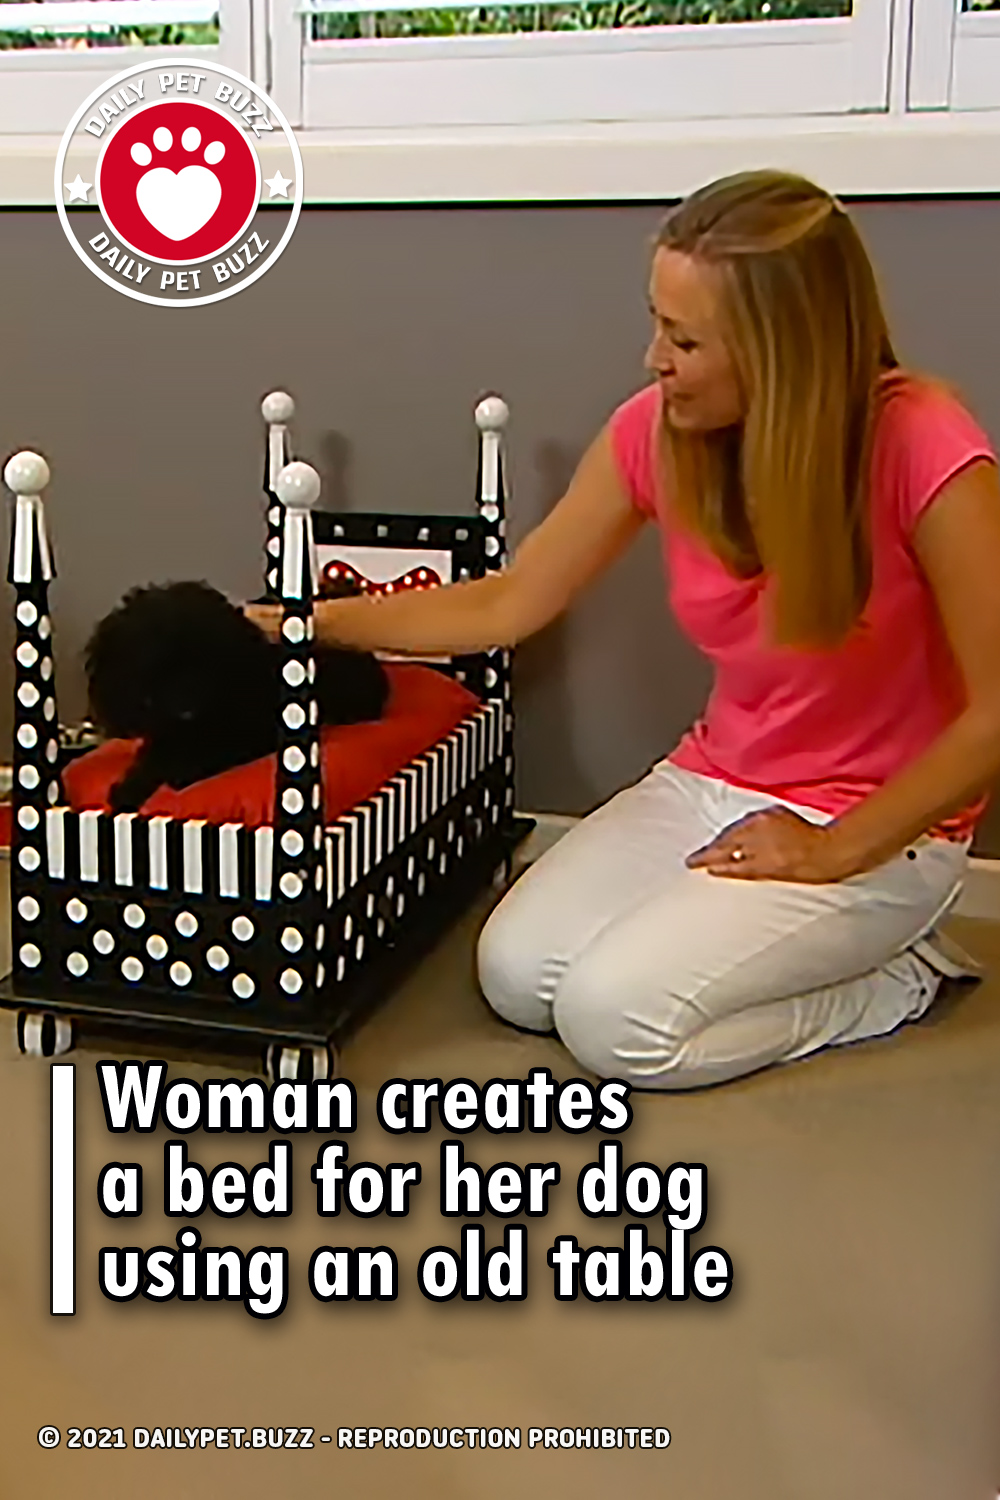 Woman creates a bed for her dog using an old table